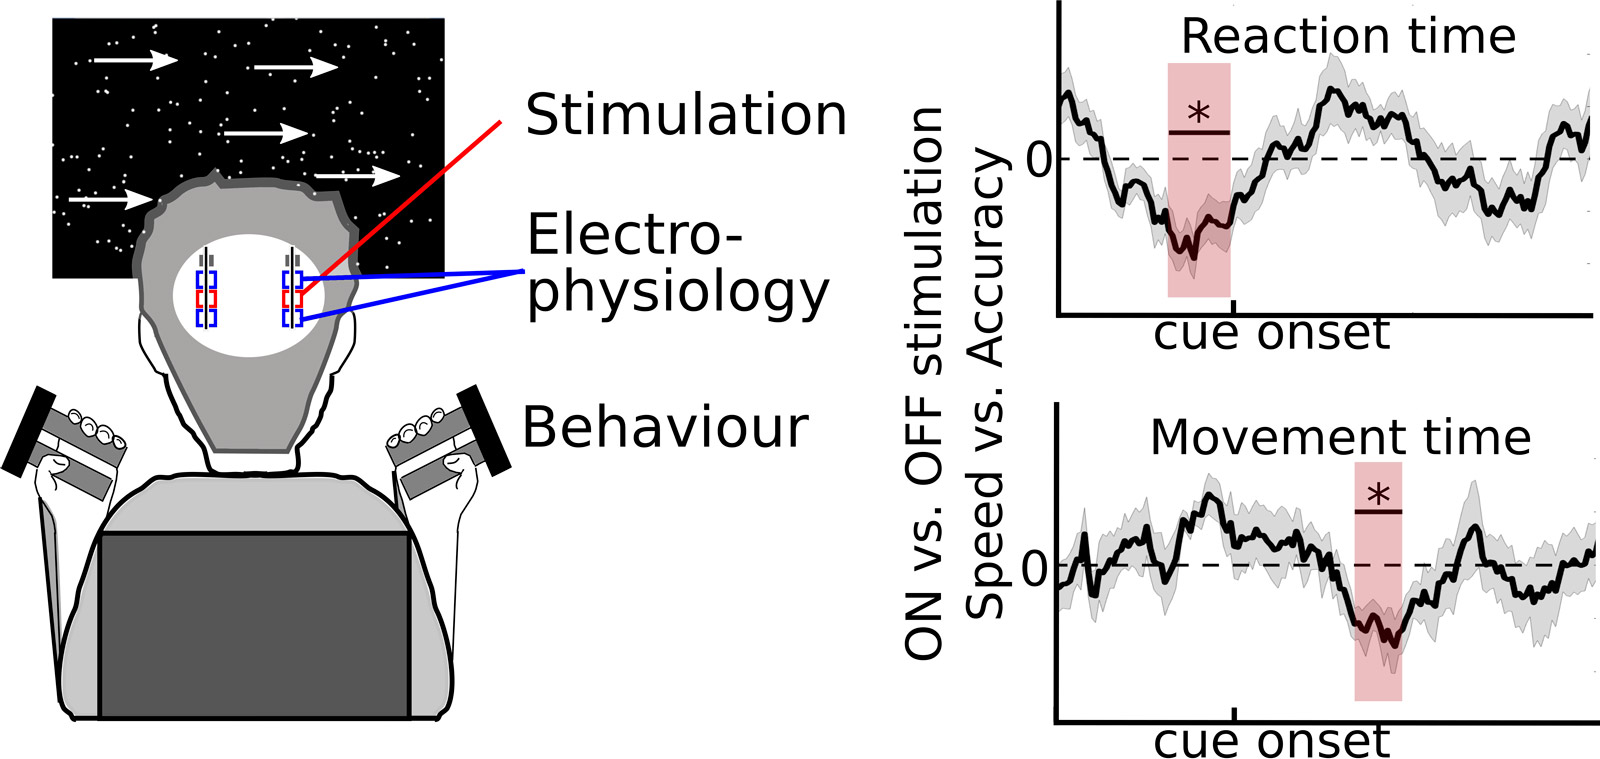 on the left: a diagram of a human subject with grips used for feedback in a task; also shows stimulation and recording electrodes in the subject's brain, while viewing a visual task. On the right there are two plots of reaction time and movement time, ON vs OFF stimulation, speed vs accuracy